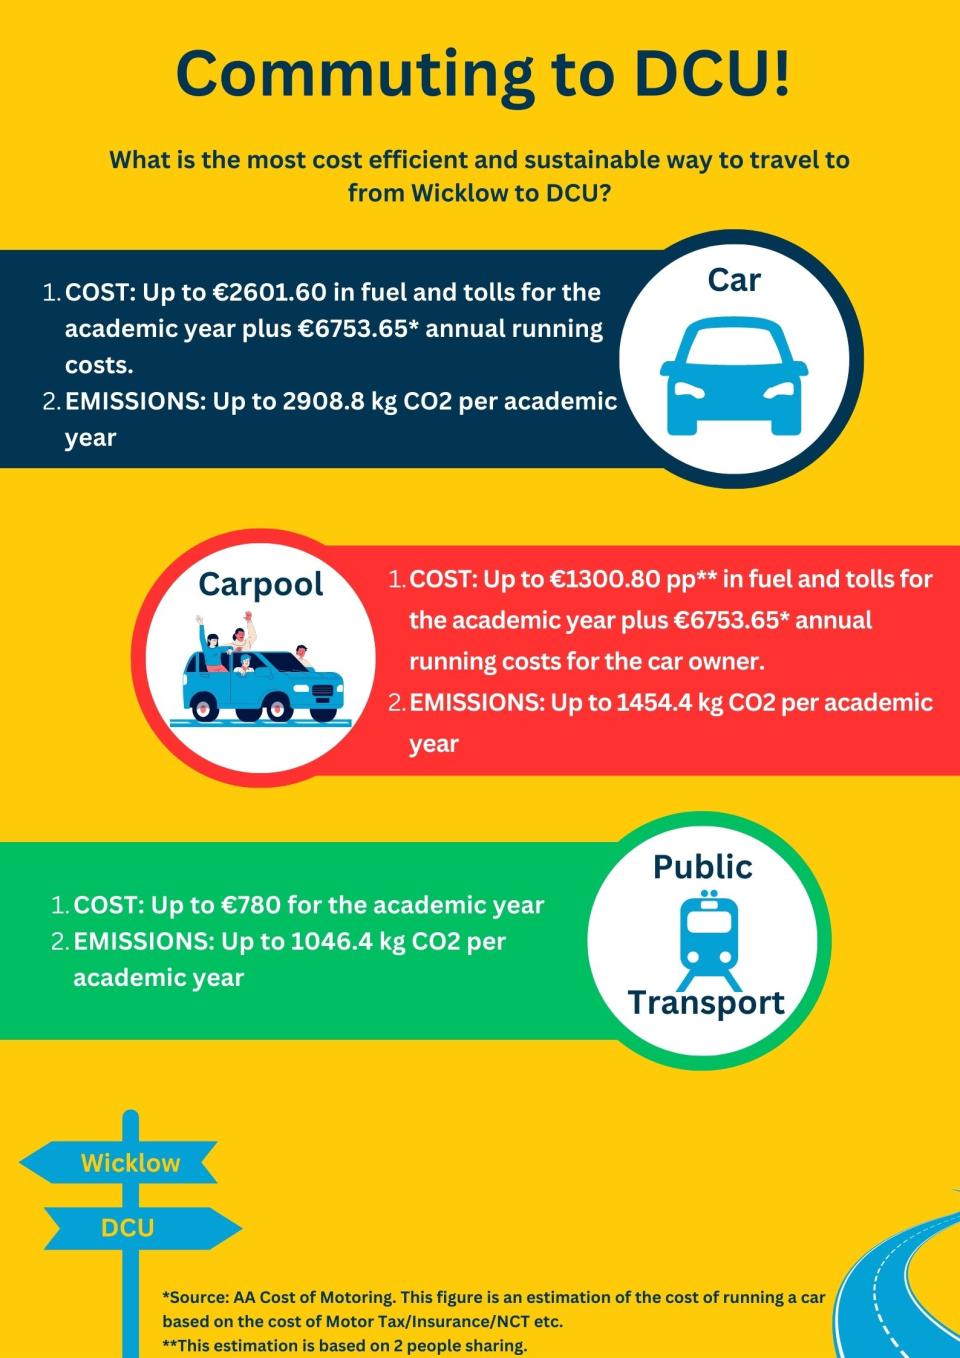 Comparison of cost and emissions associated with travelling to DCU throughout academic year via different transport modes. Car - €2601.60 in fuel and tolls, 2908.8kg CO2 in emissions. Carpool - €1300 per person in fuel and tolls, 1454.4kg CO2 in emissions.  Public Transport - €780 in fares, 1046kg CO2 in emissions.